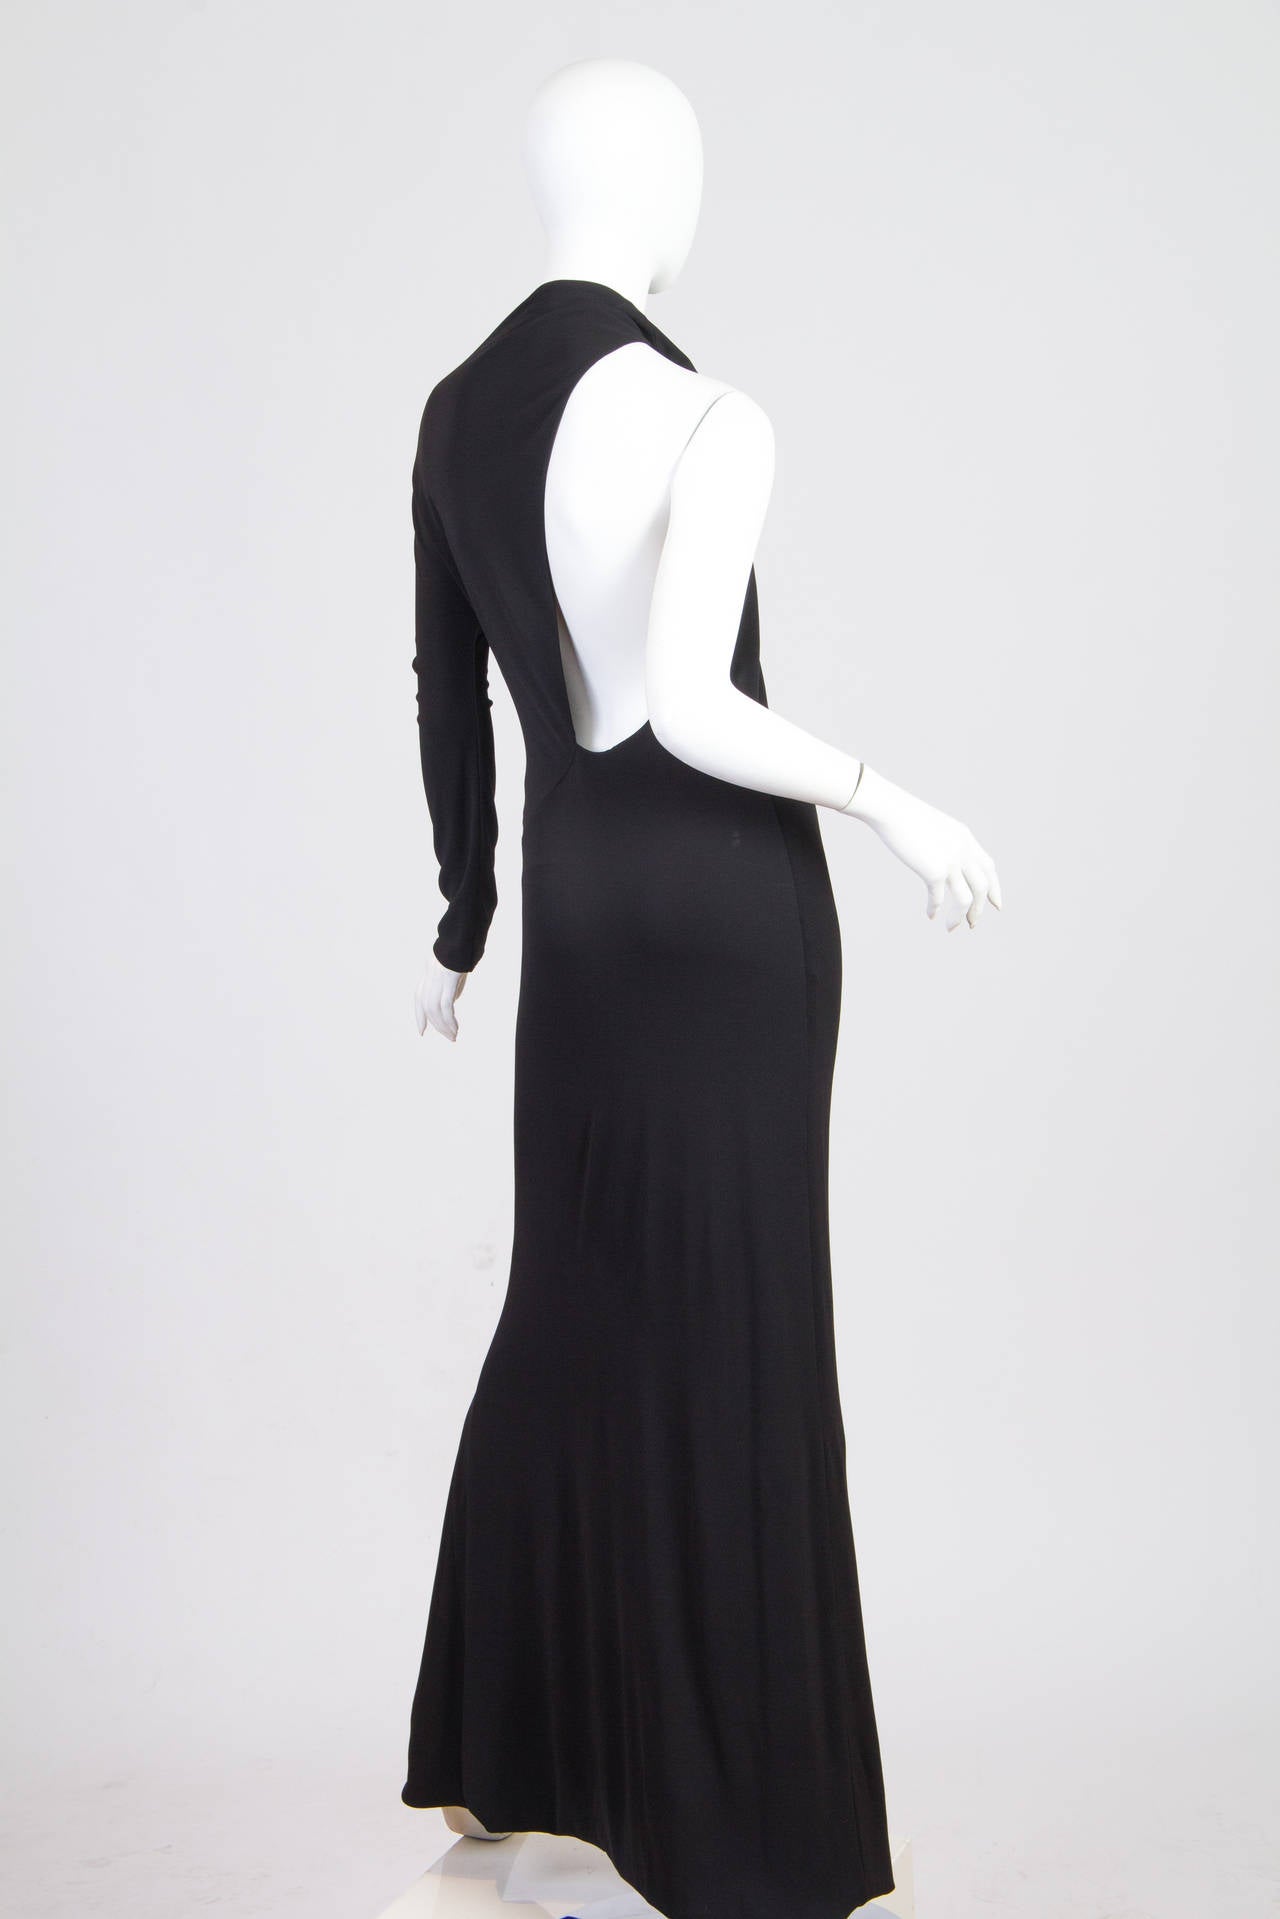 Black Tom Ford for Gucci 1996/7 Silk Jersey Gown As Worn by Pat Cleveland 1990s